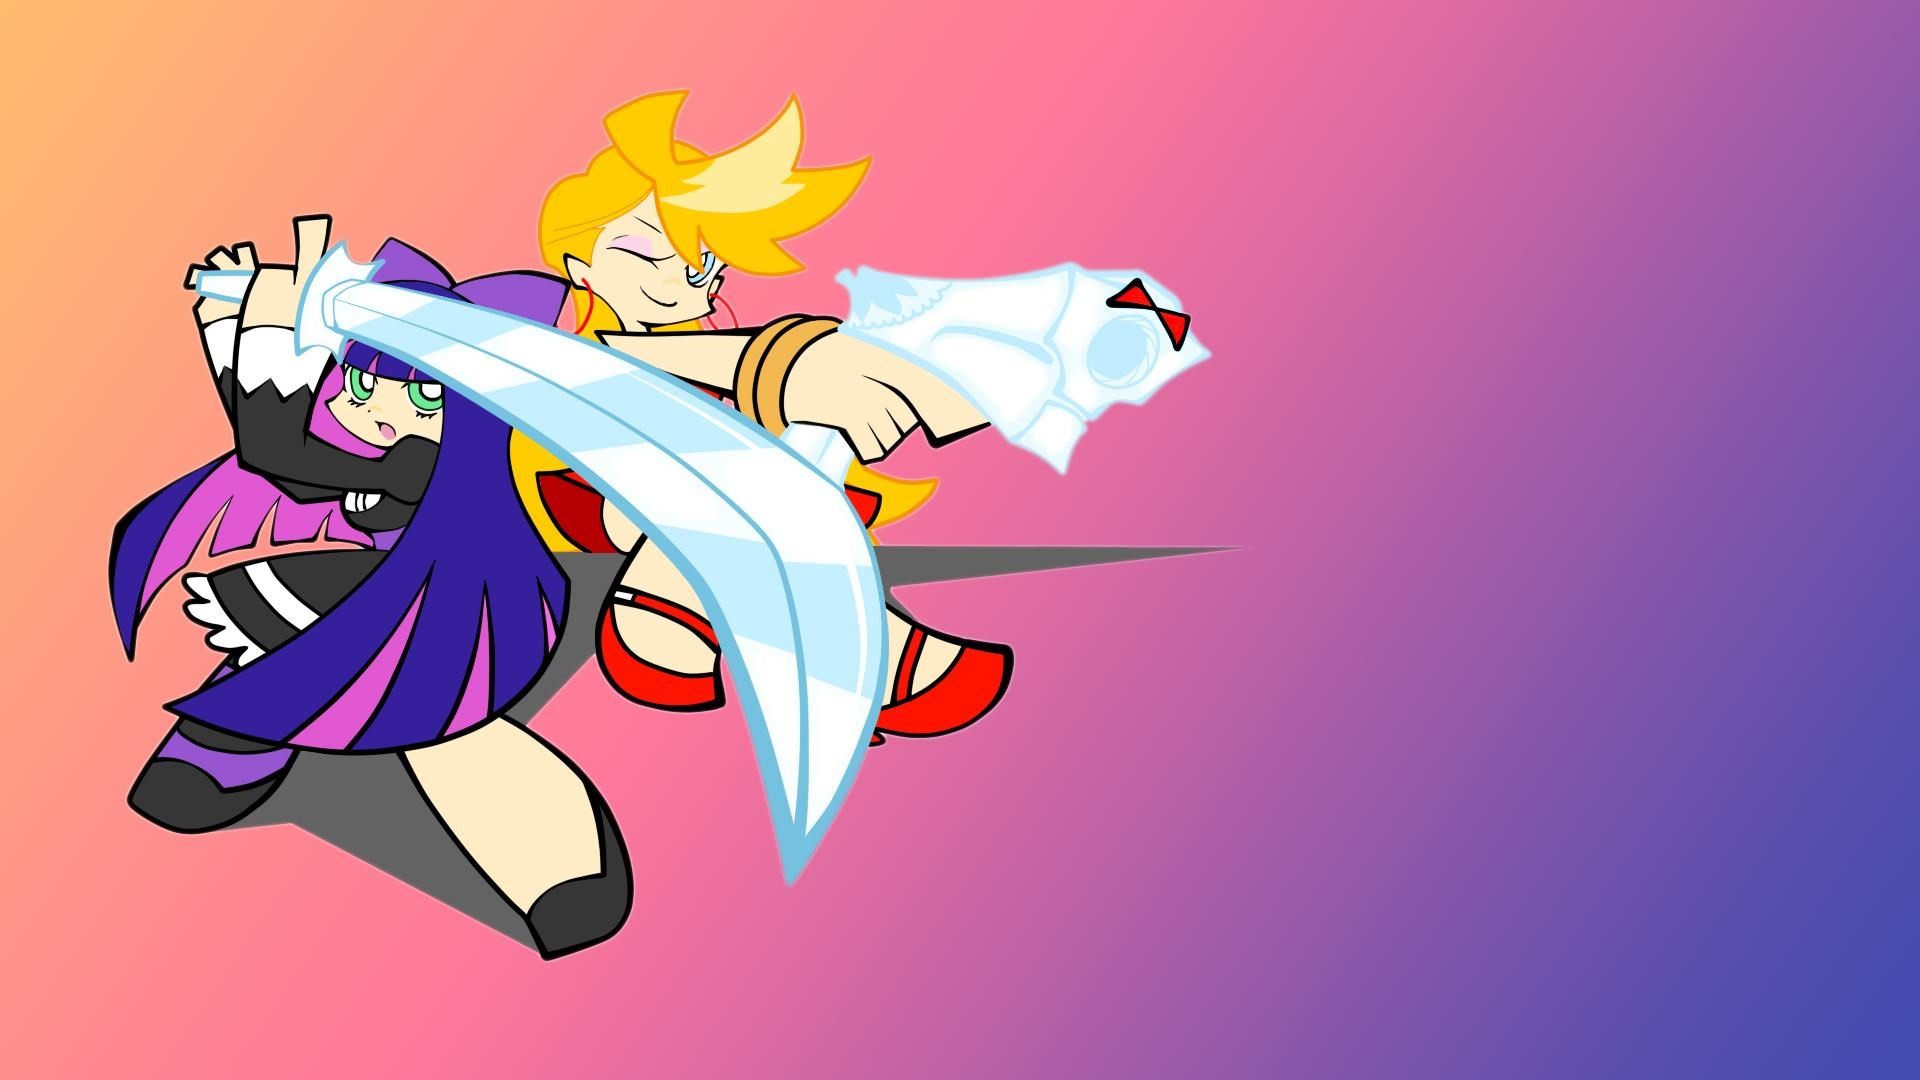 1920x1080  free high resolution wallpaper panty and stocking with garterbelt  JPG 142 kB